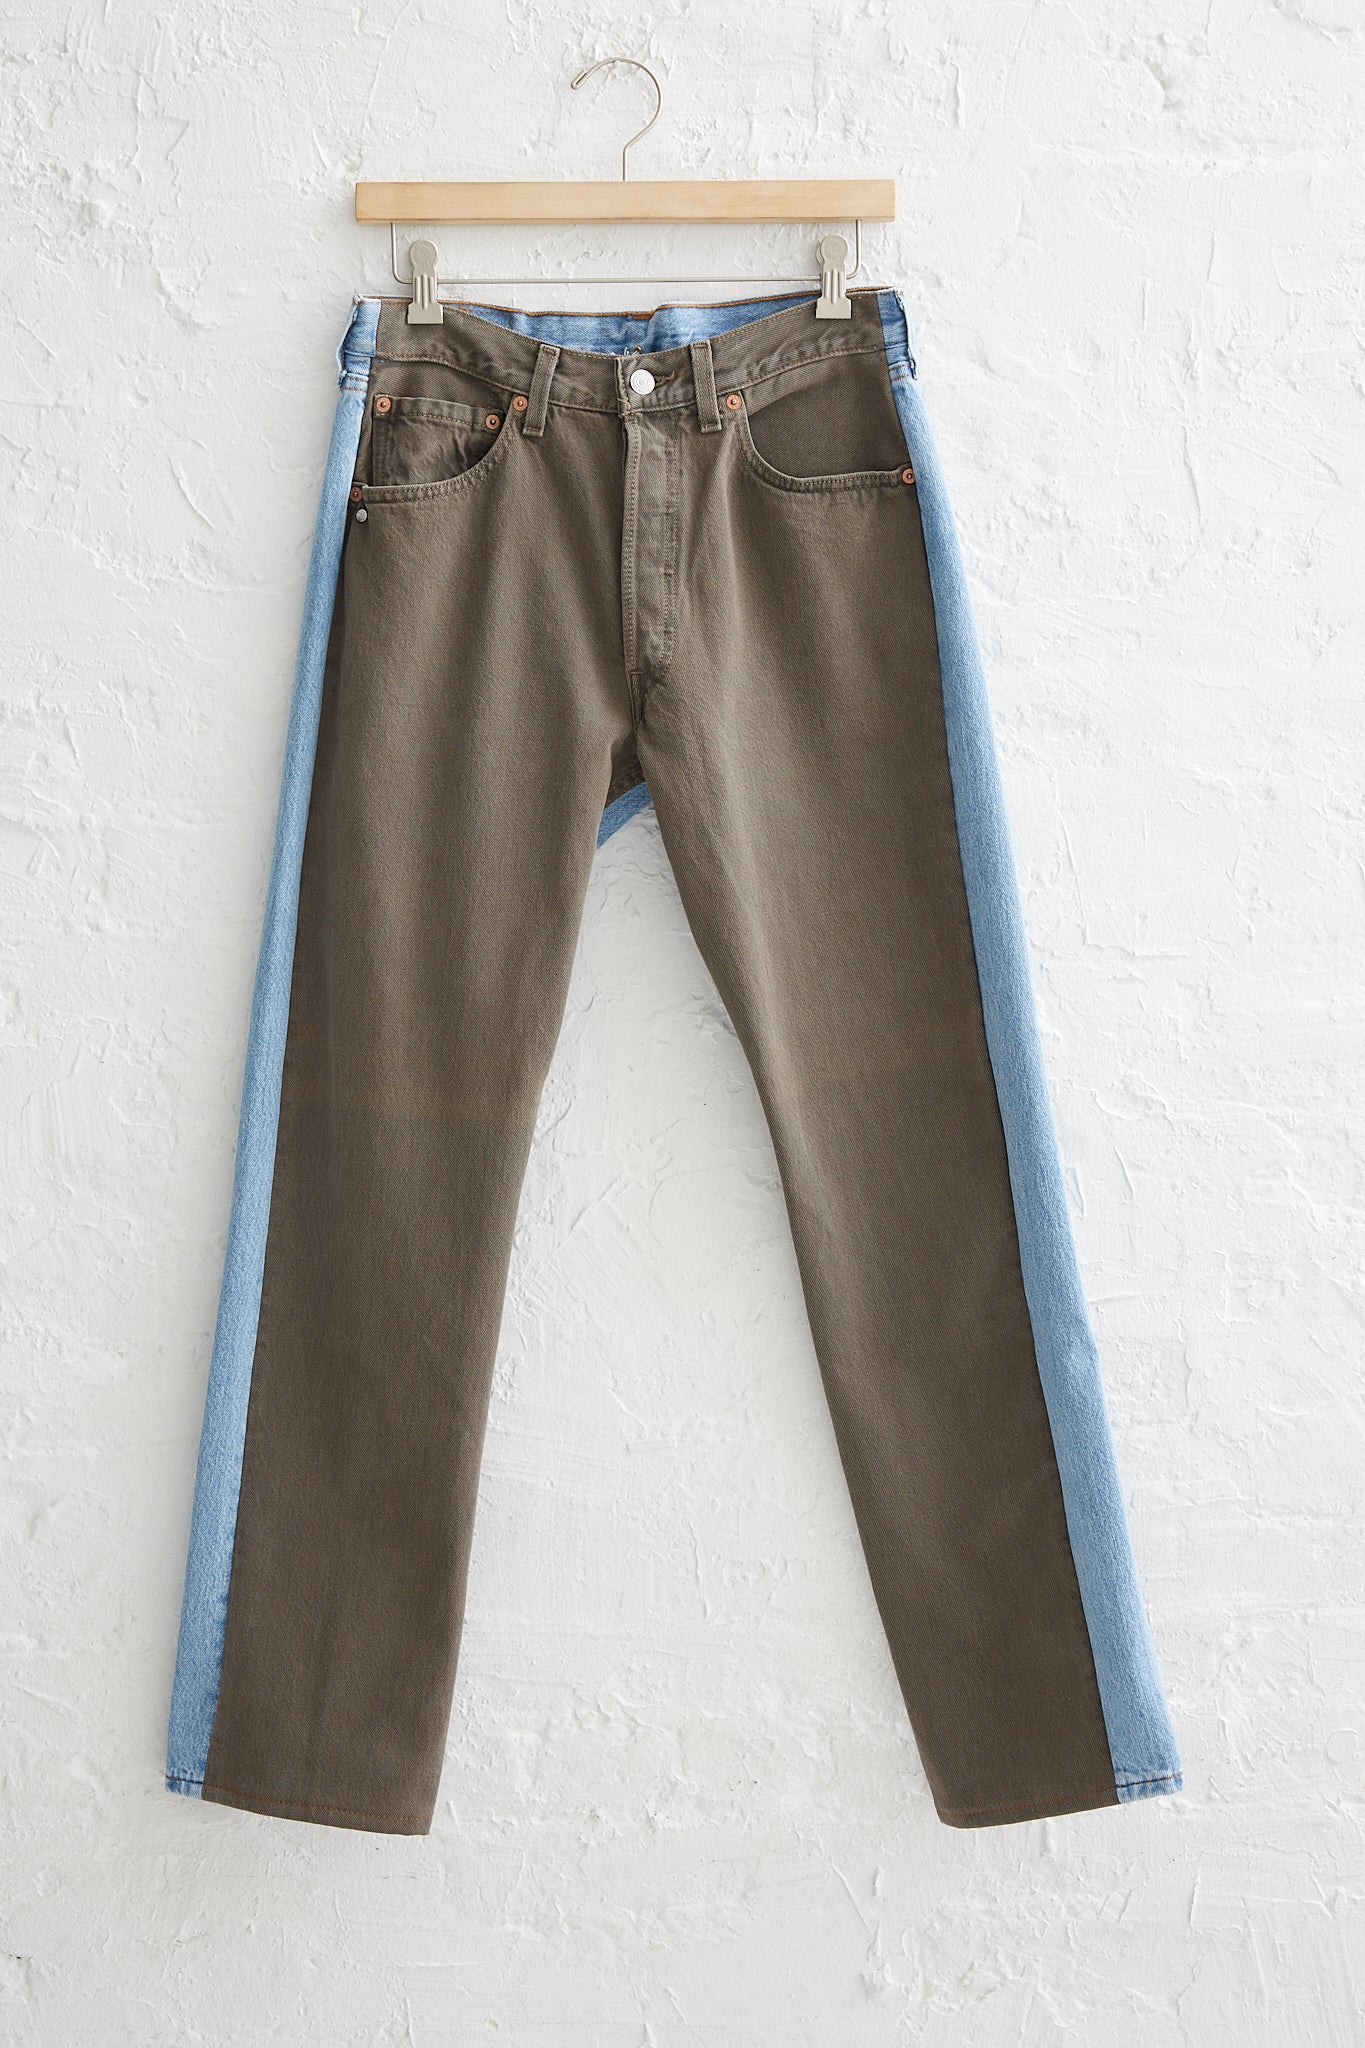 A pair of Bless Jeanspleatfront No. 73 in Surprise Color Mix A denim jeans with a mid-waist and 5-pocket design hanging on a wall.